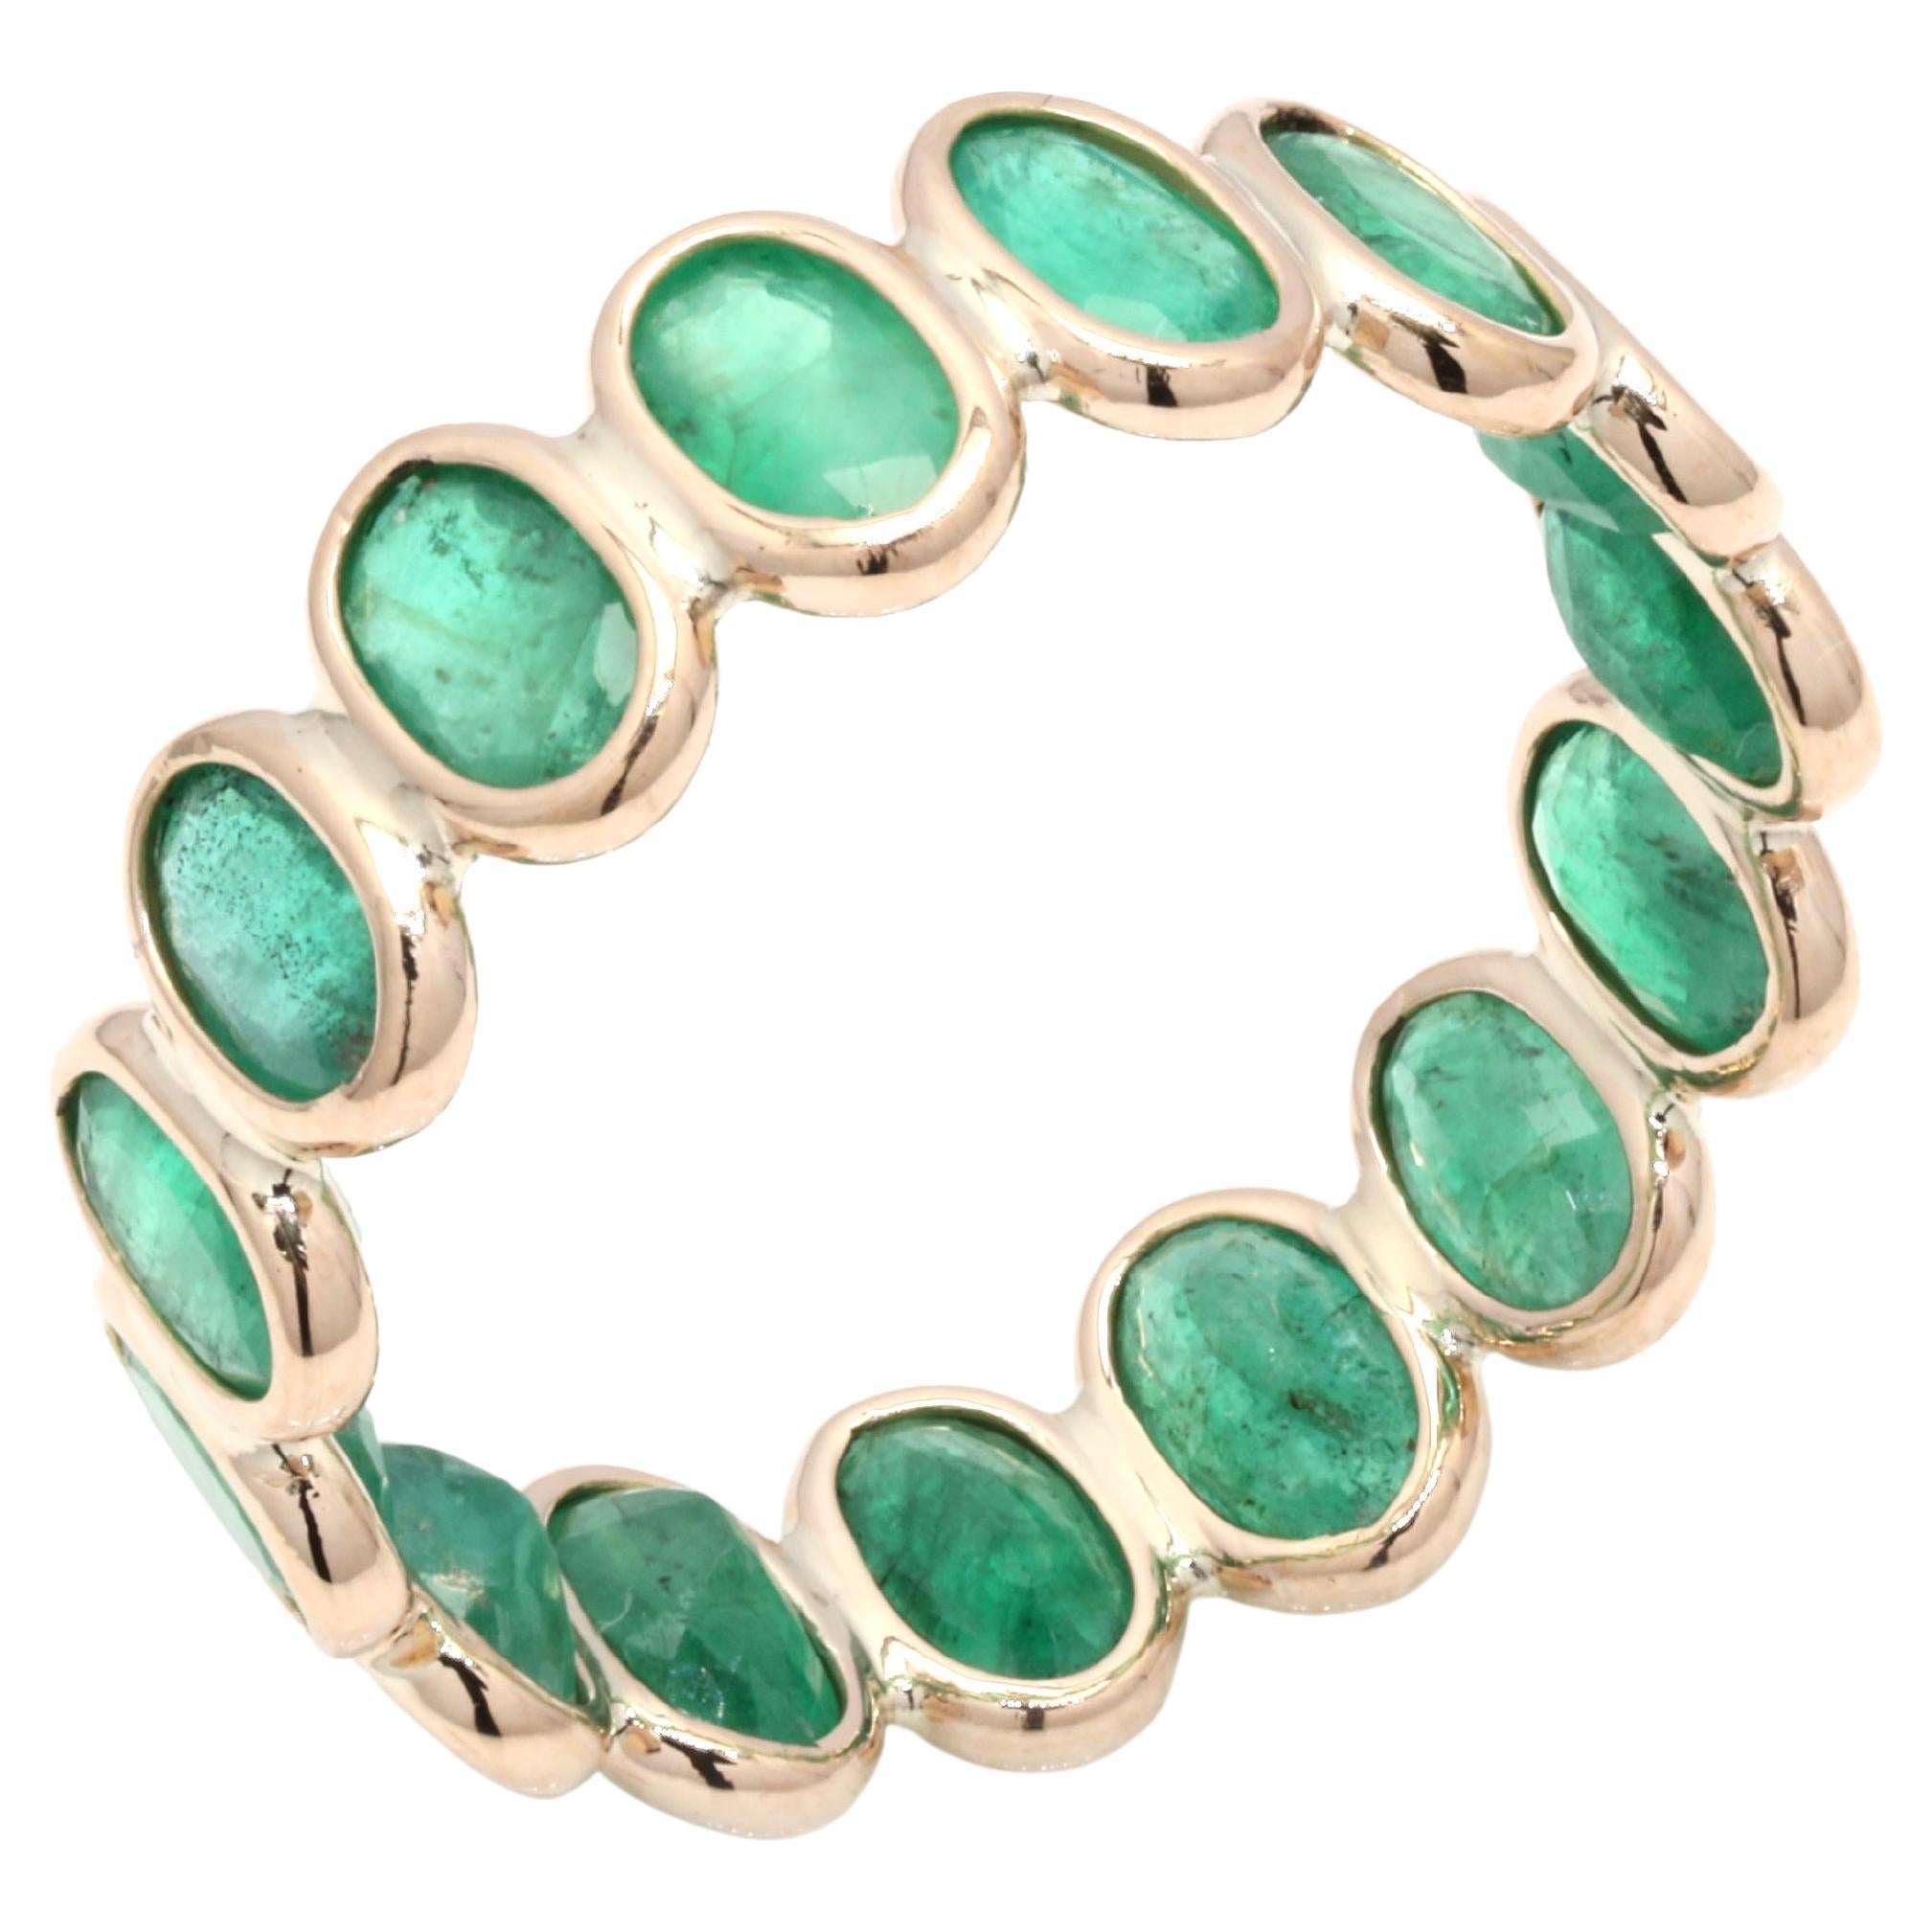 14 Karat Yellow Gold Eternity Ring with 3.41 Ct Oval Cut Natural Emerald